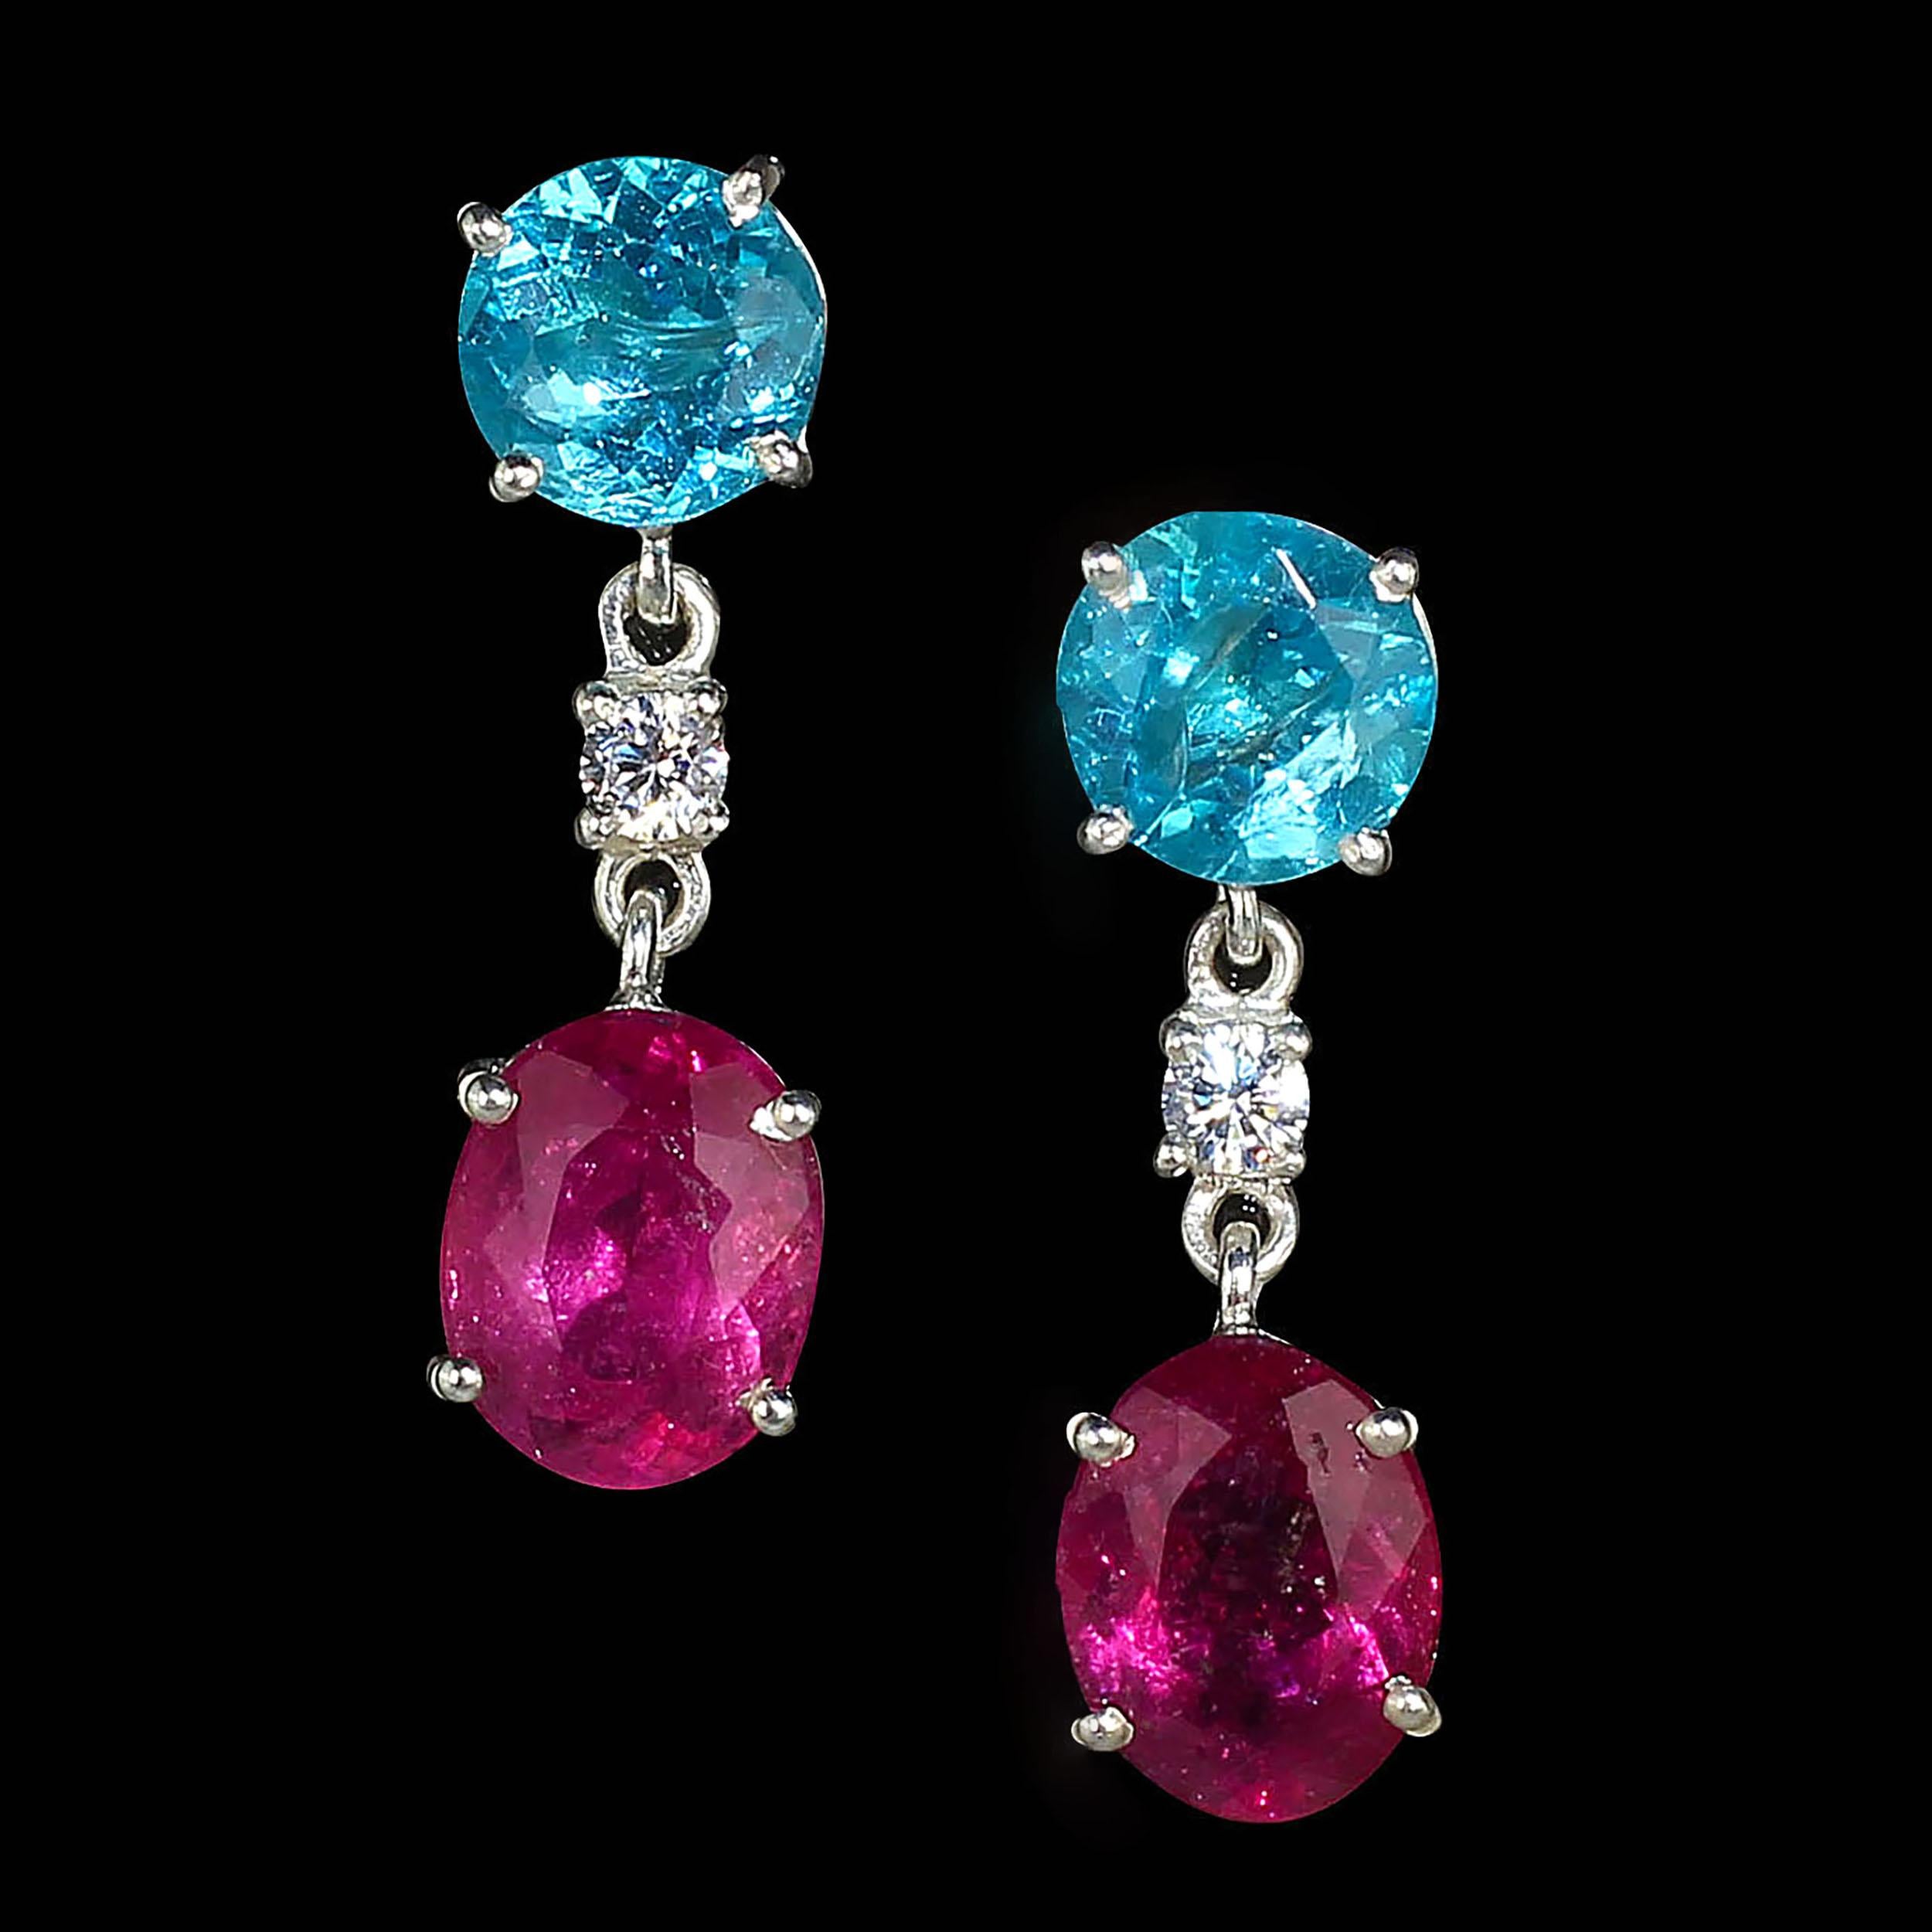 Who doesn't love Pink and Blue?  Here's your sizzling look!  Hot pink oval Rubelites dangling from bright round neon blue/green Apatites with a tiny sparkling Cambodian Zircon between to hinge them together.  What's not to love?  These gorgeous